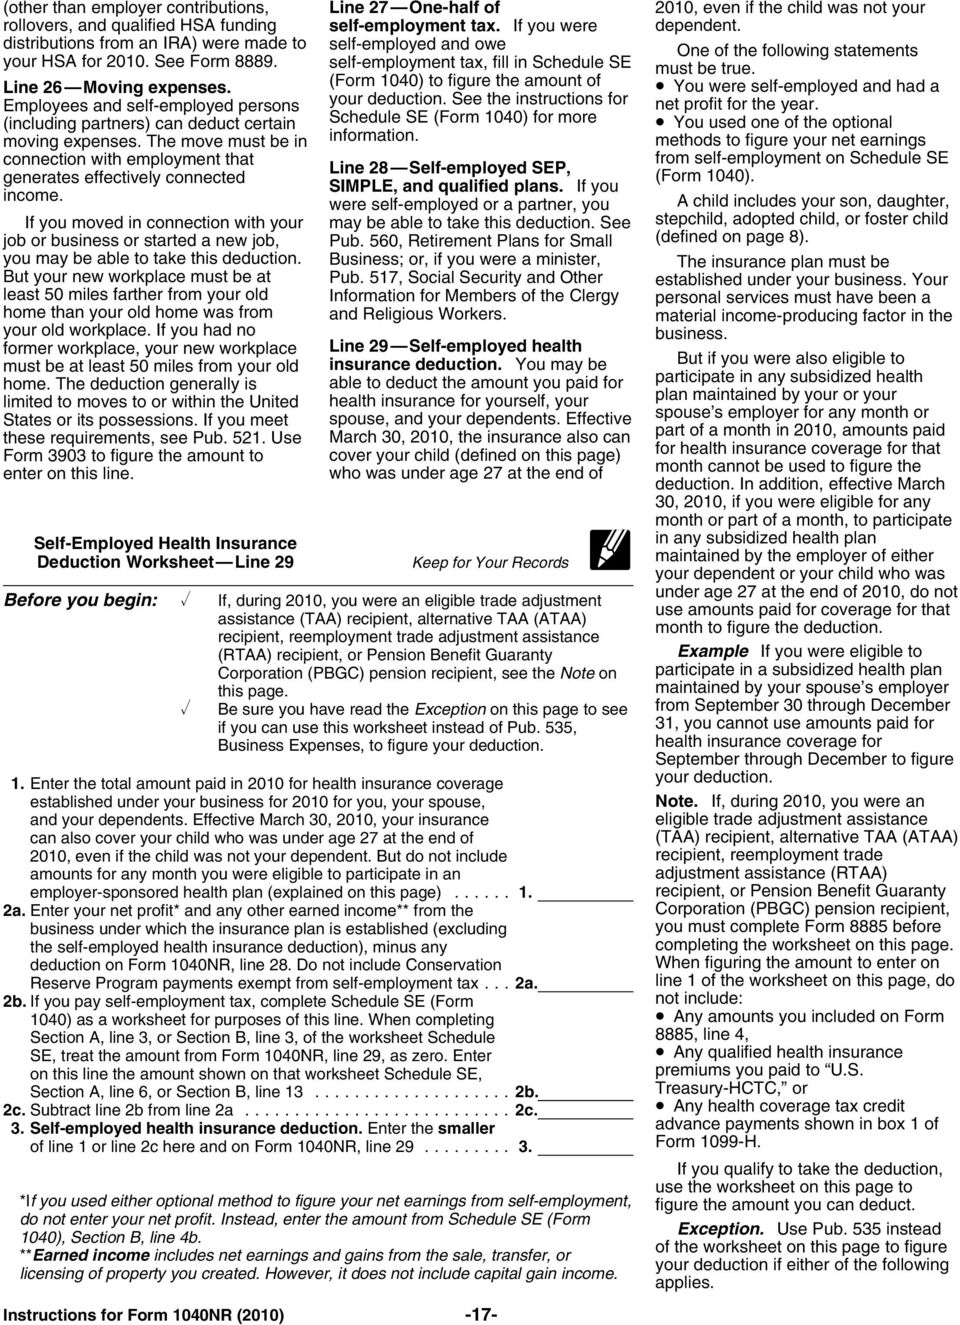 form 1040 health insurance deduction
 Instructions for Form 17NR - PDF Free Download